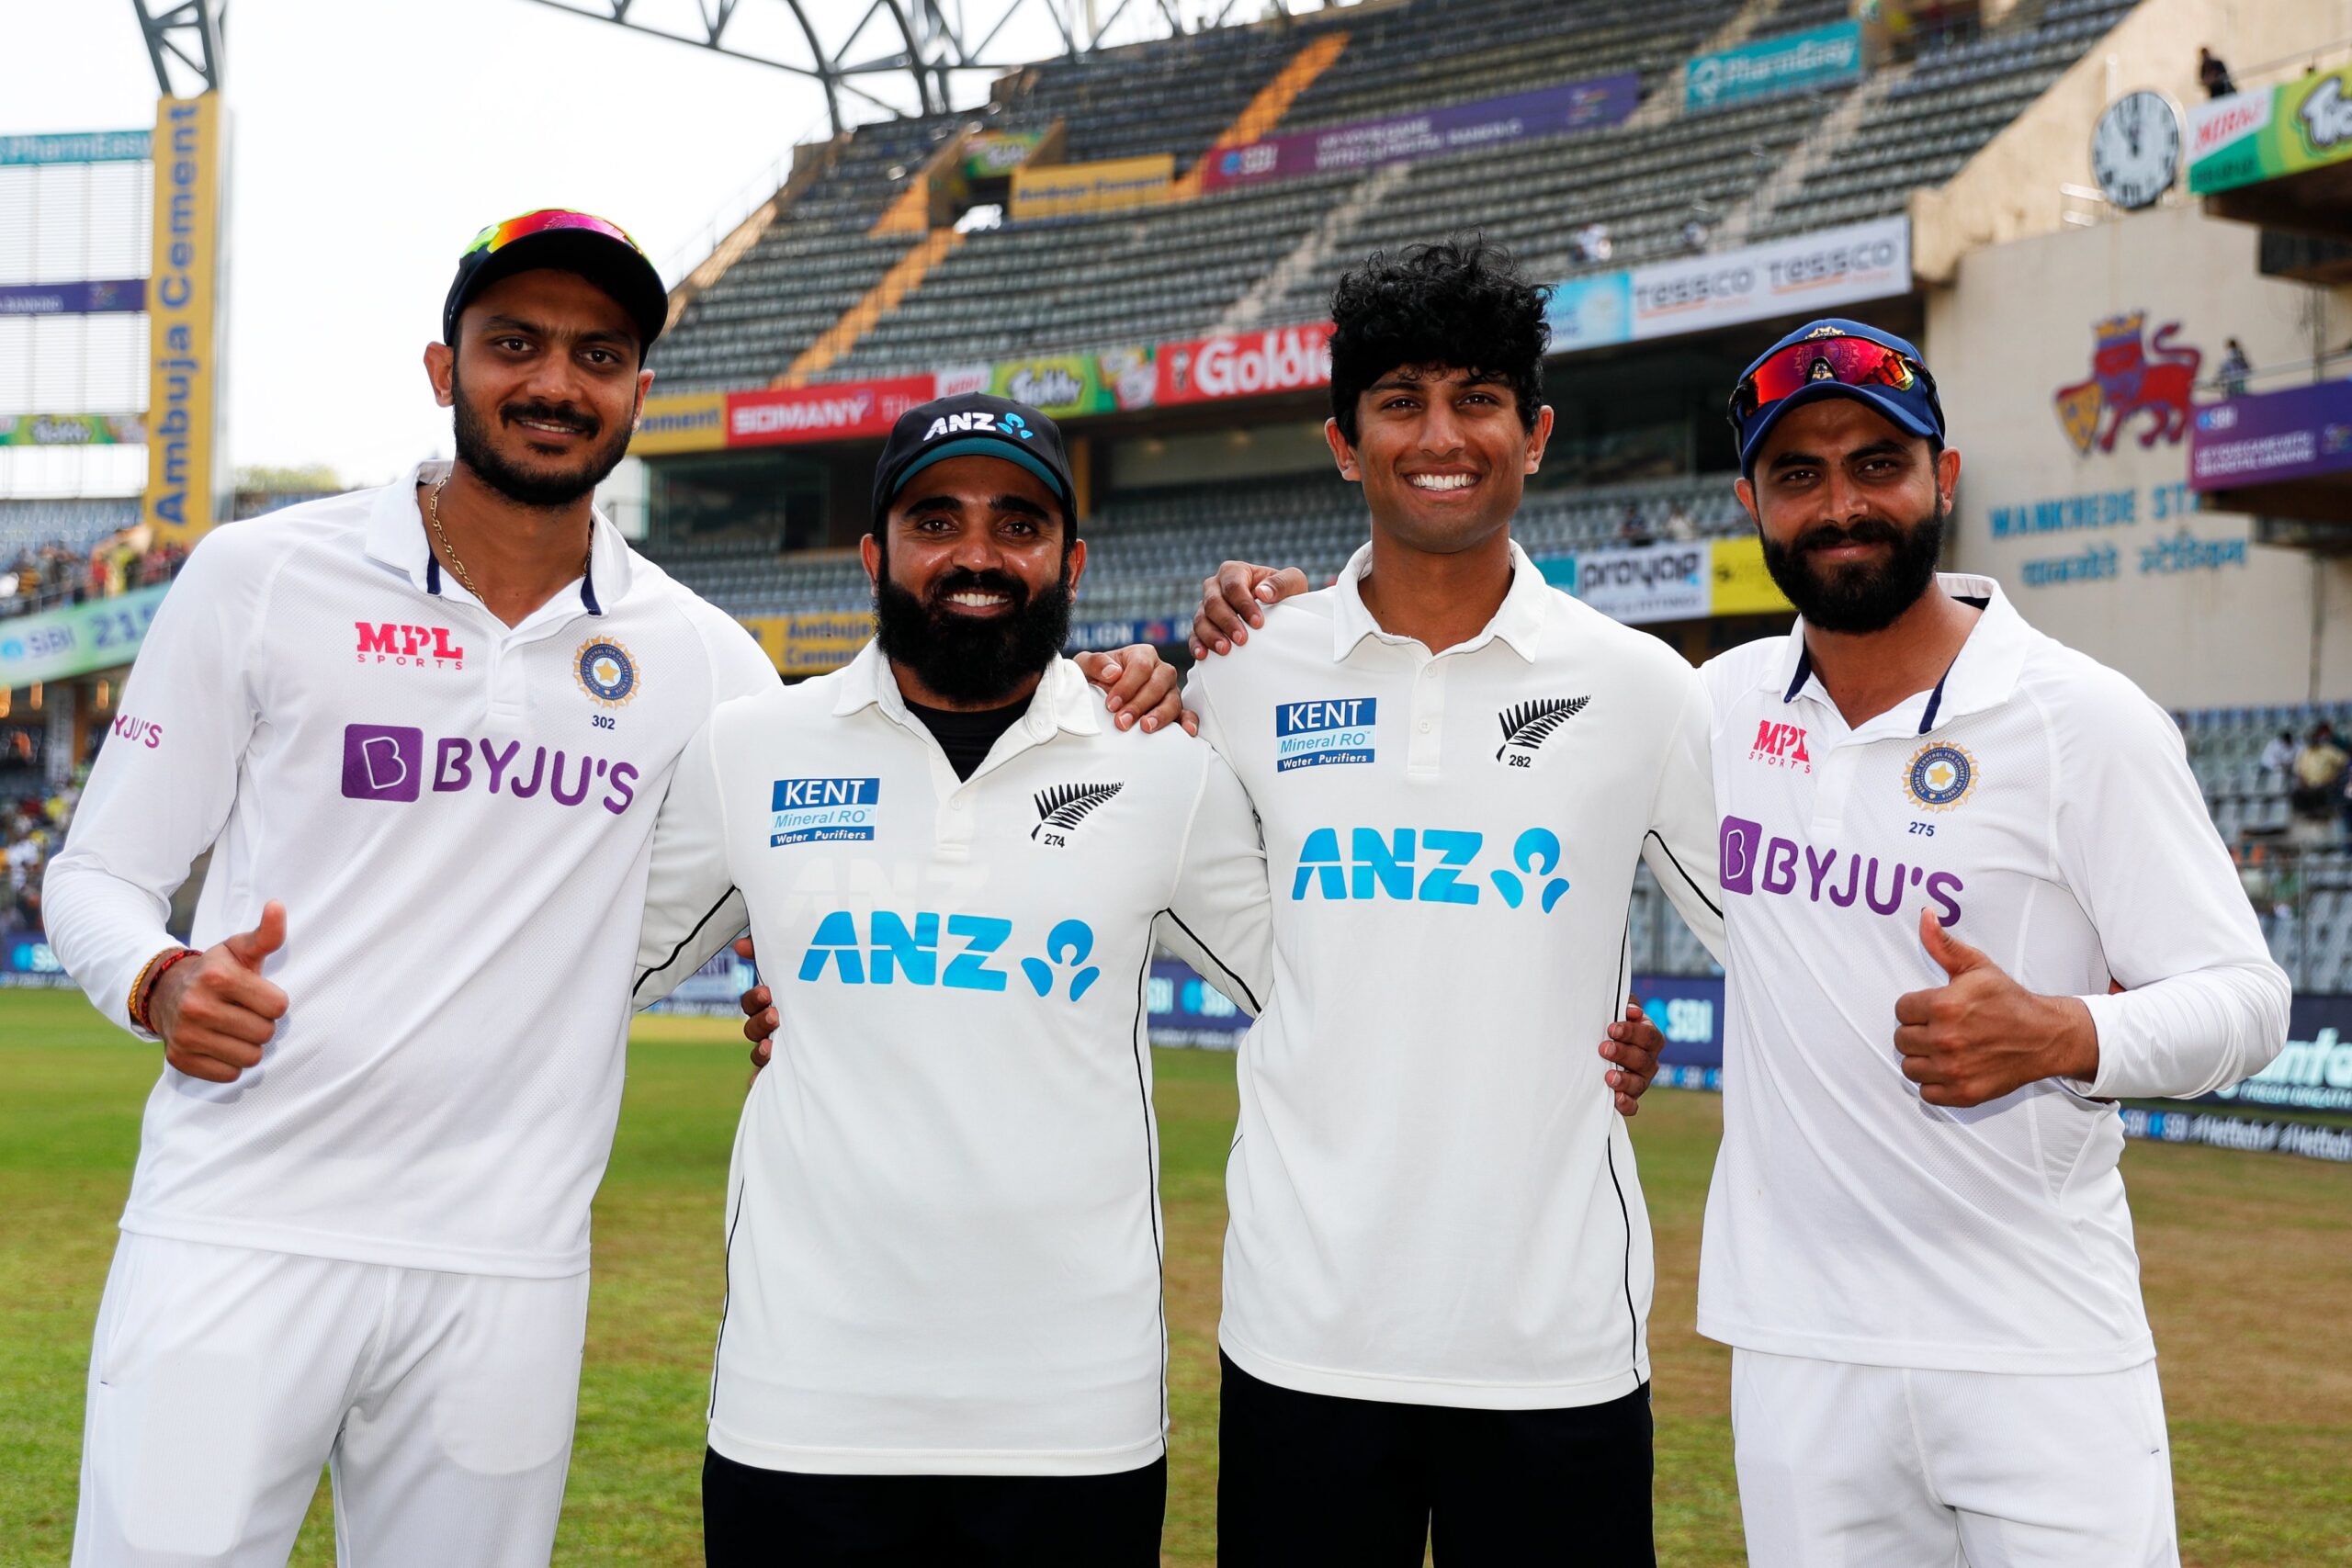 Axar, Patel, Ravindra, and Jadeja pose for the camera as the India vs. New Zealand series comes to a finish.